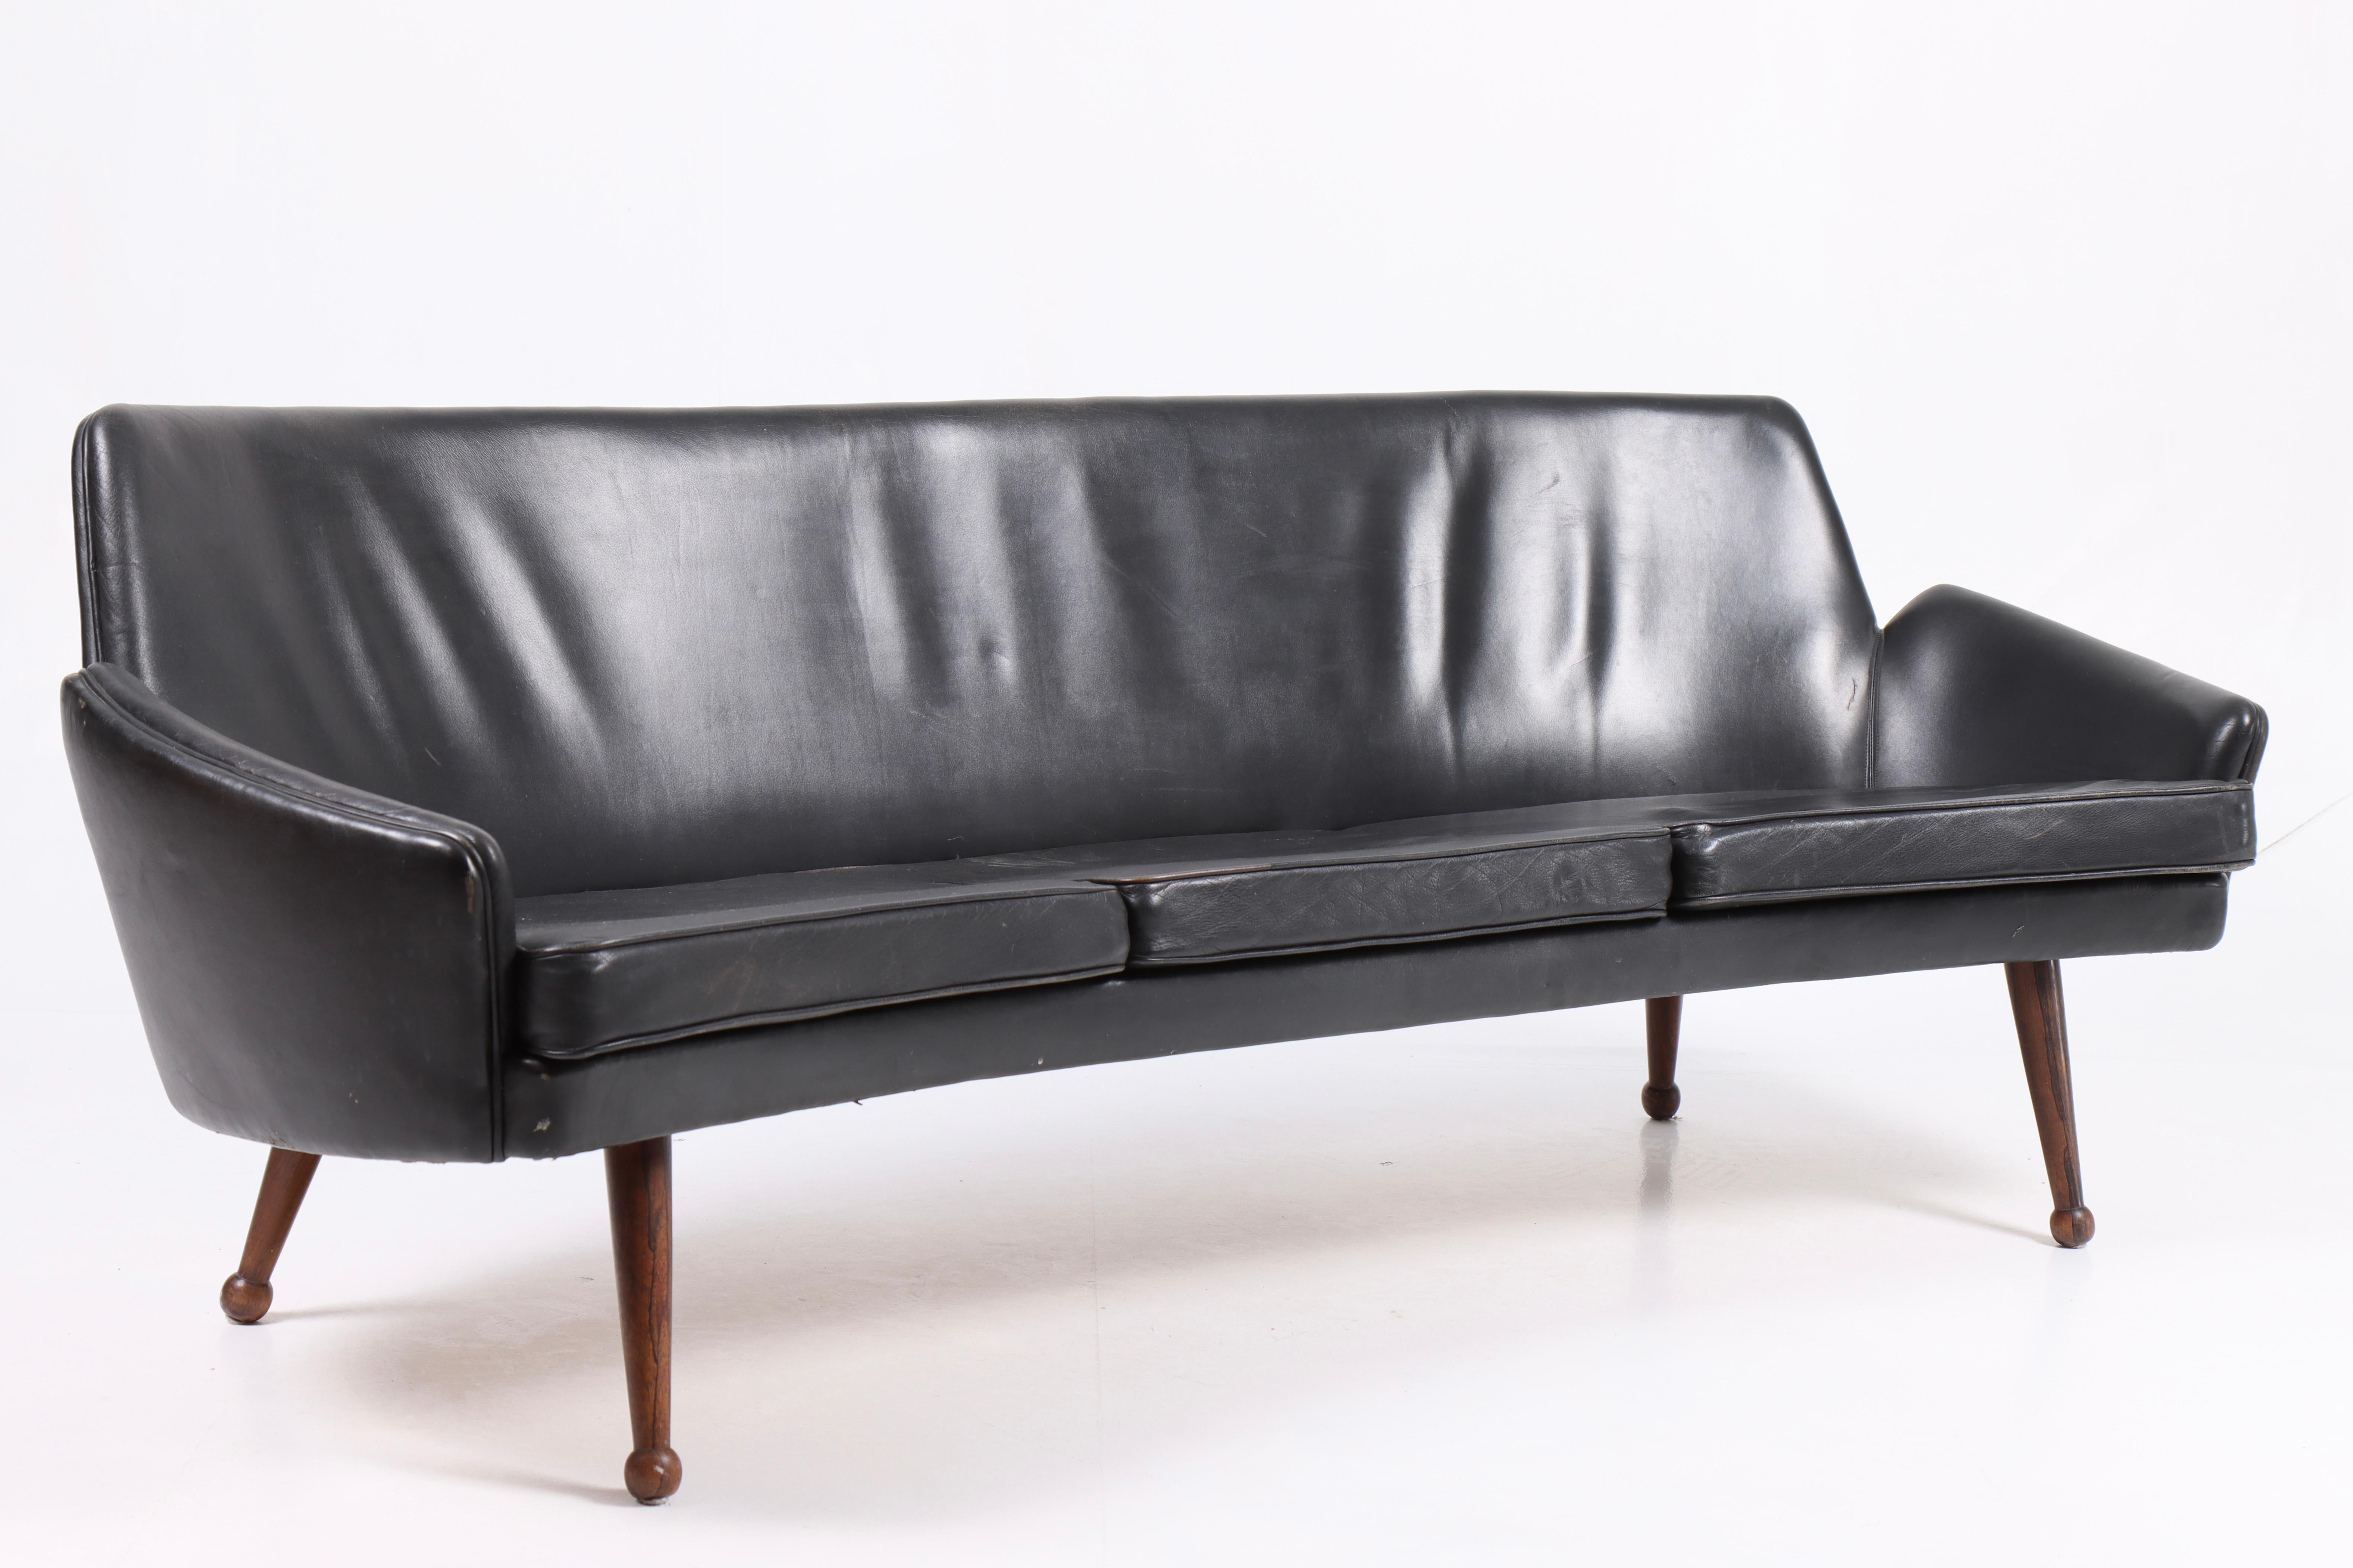 Mid-20th Century Midcentury Sofa in Patinated Leather, Danish Design 1950s For Sale